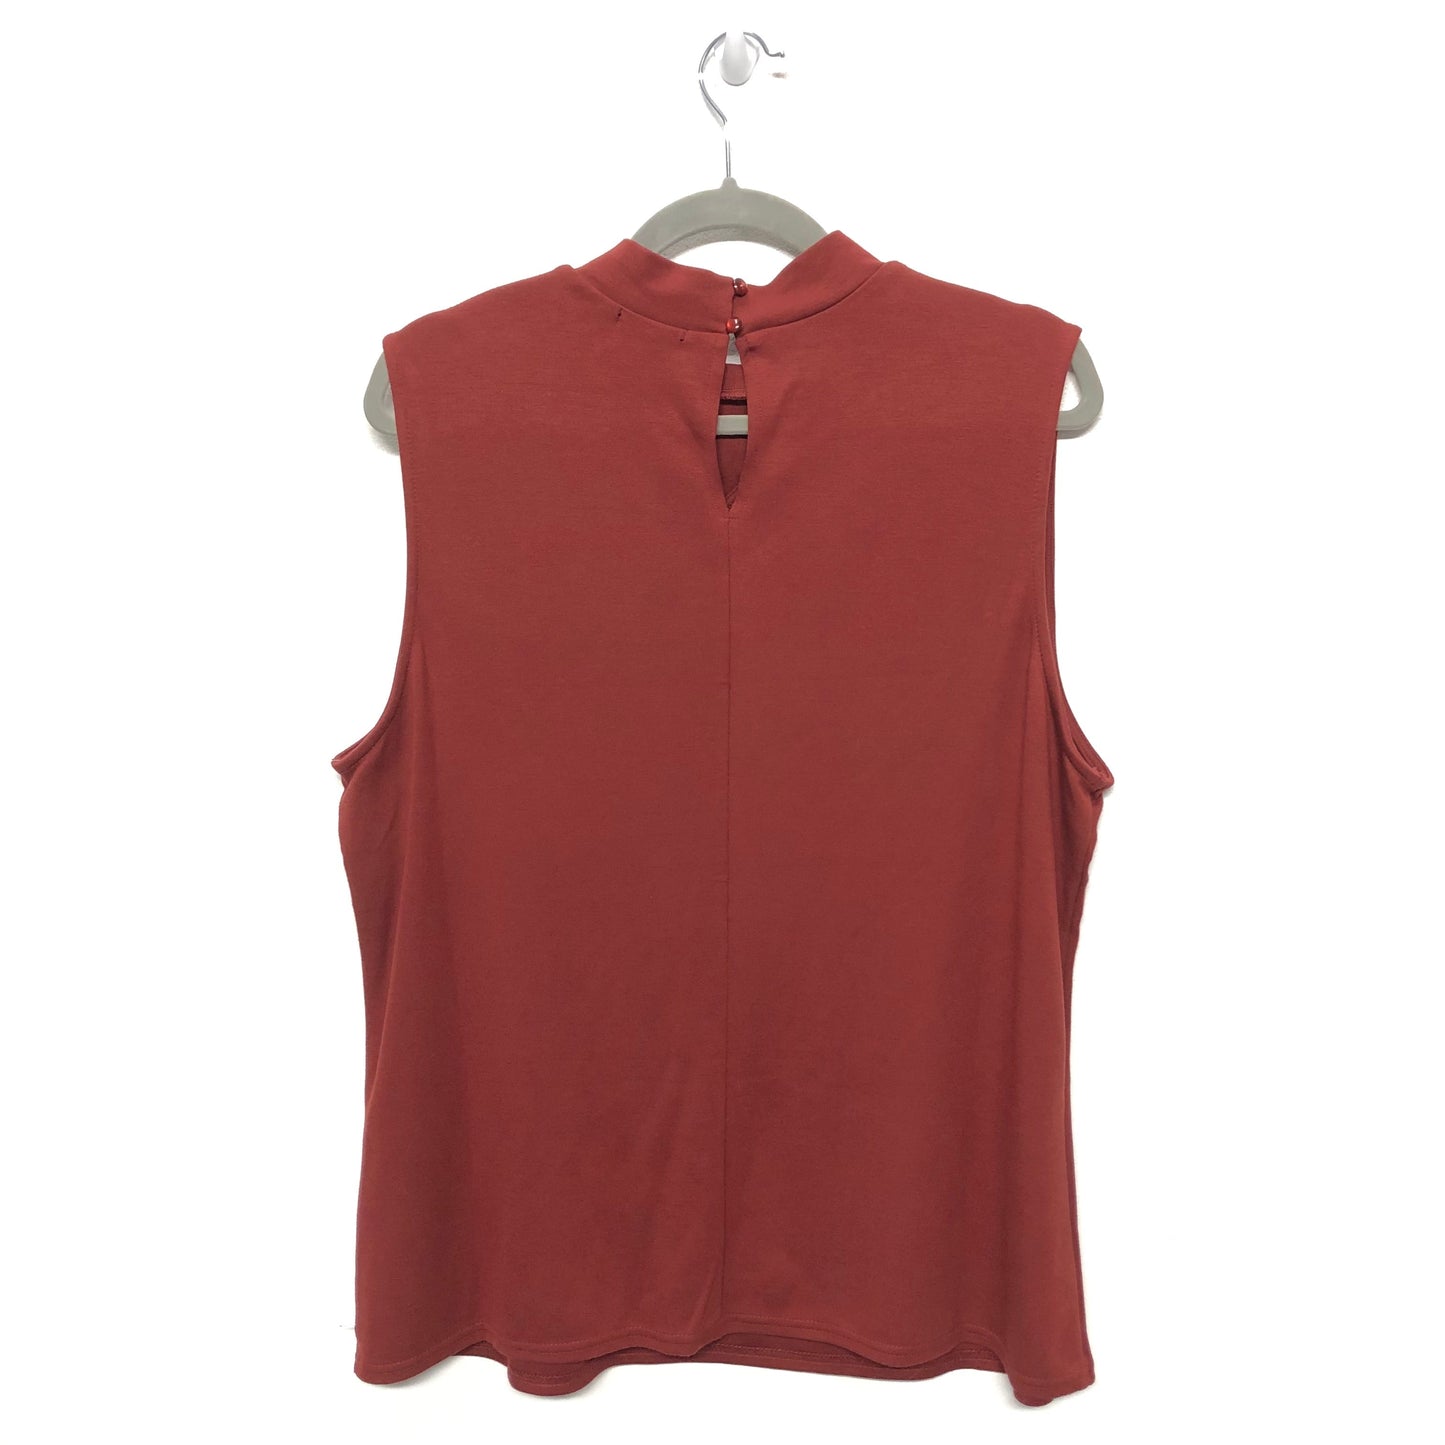 Top Sleeveless By Halogen  Size: 2x